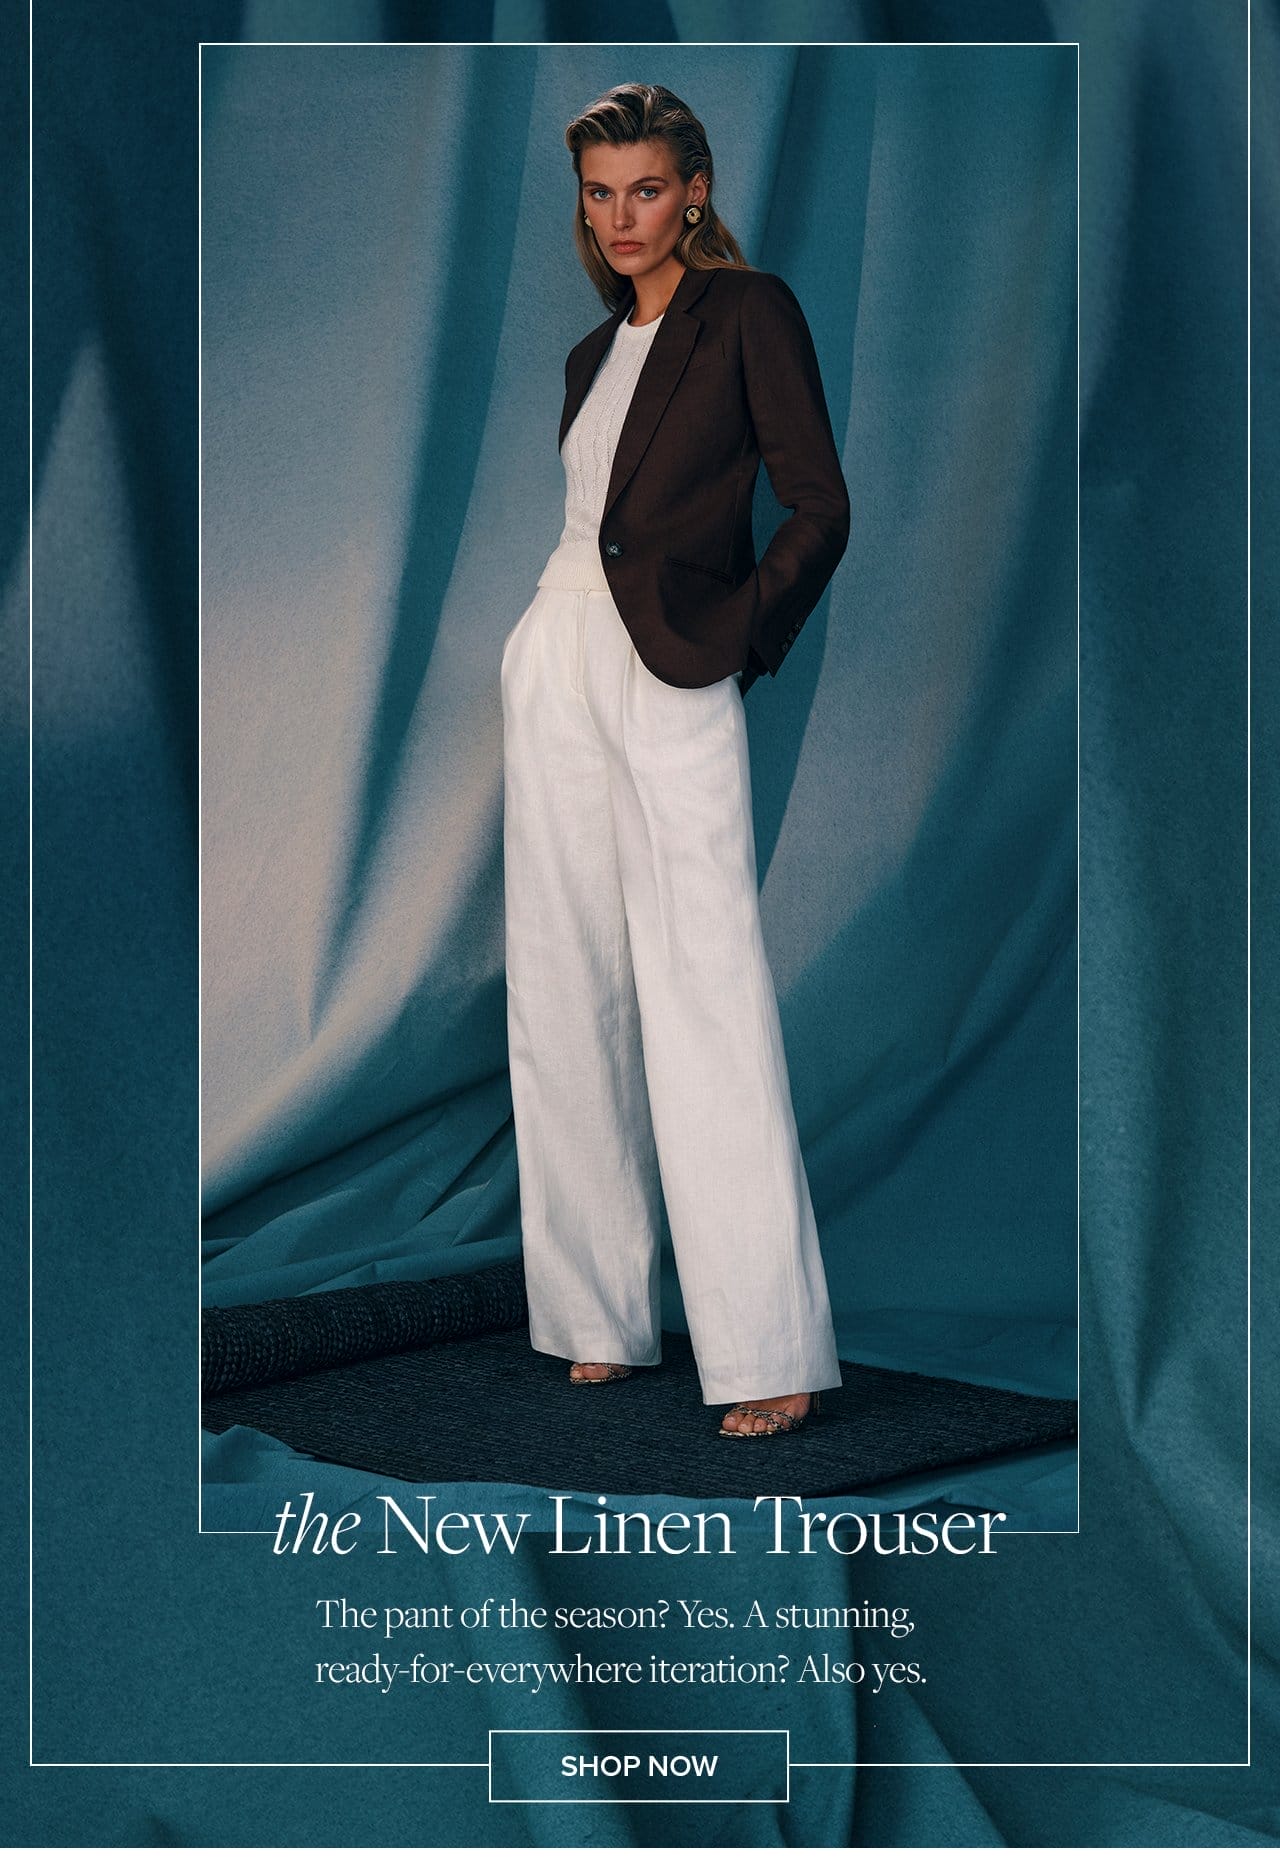 the New Linen Trouser The pant of the season? Yes. A stunning ready-for-everywhere iteration? Also yes. Shop Now